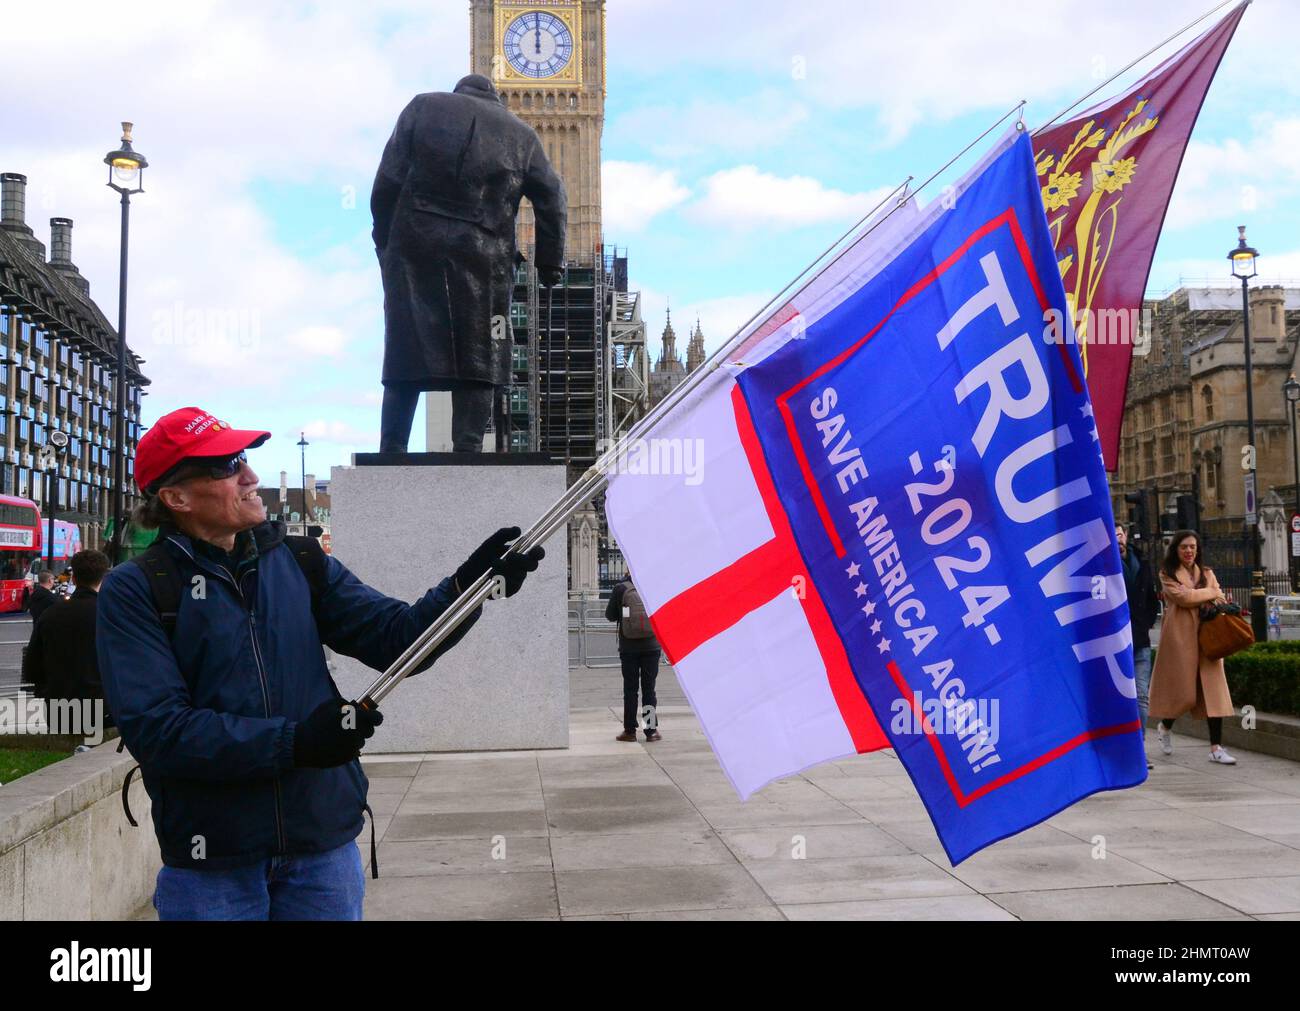 A supporter of Donald Trump holds flags supporting the ex President across the road from the House of Commons, United Kingdom, British Isles. Stock Photo